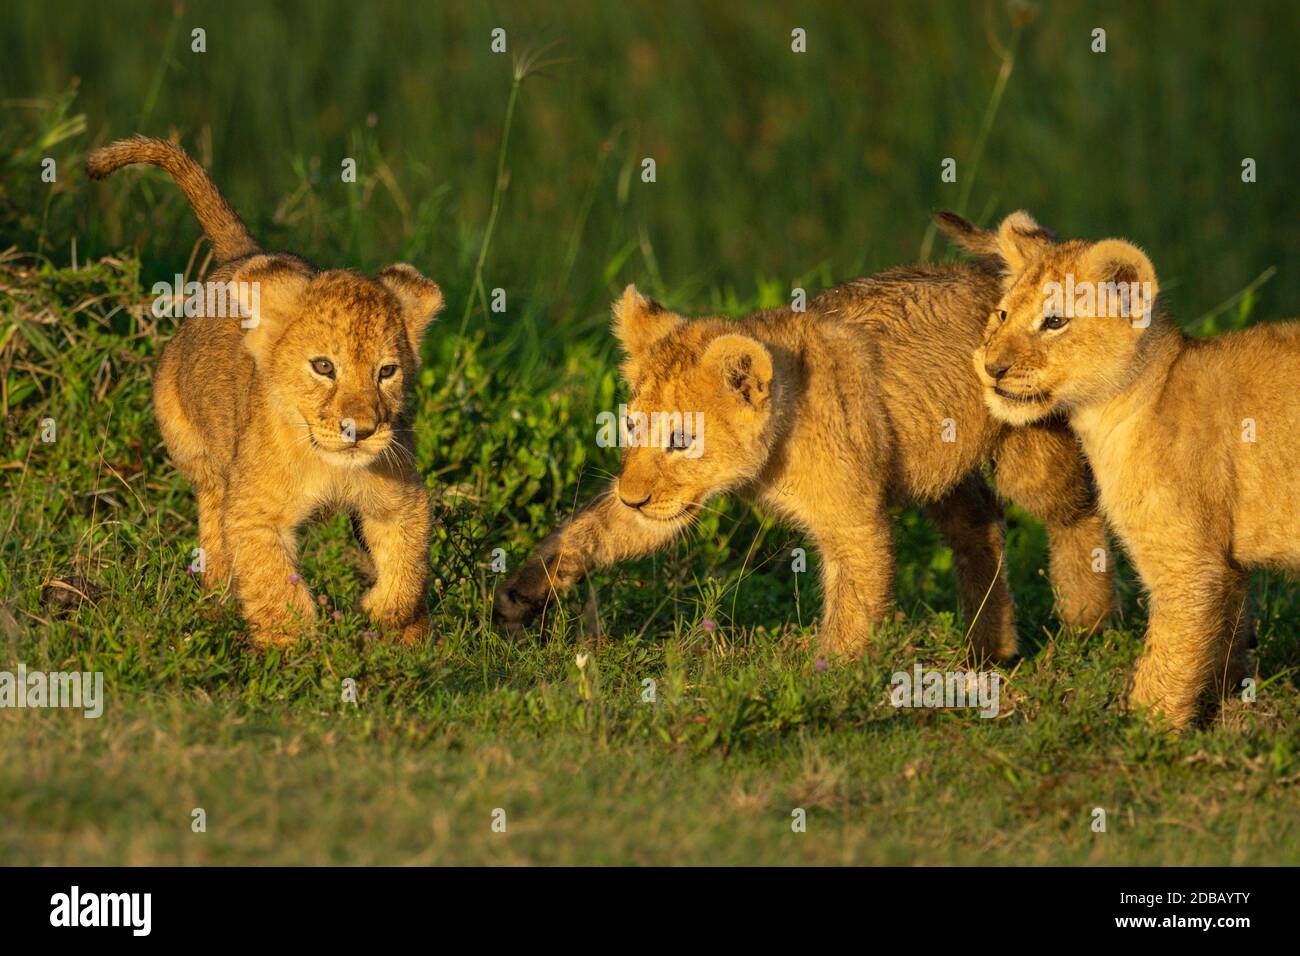 Three lion cubs play fight on grass Stock Photo